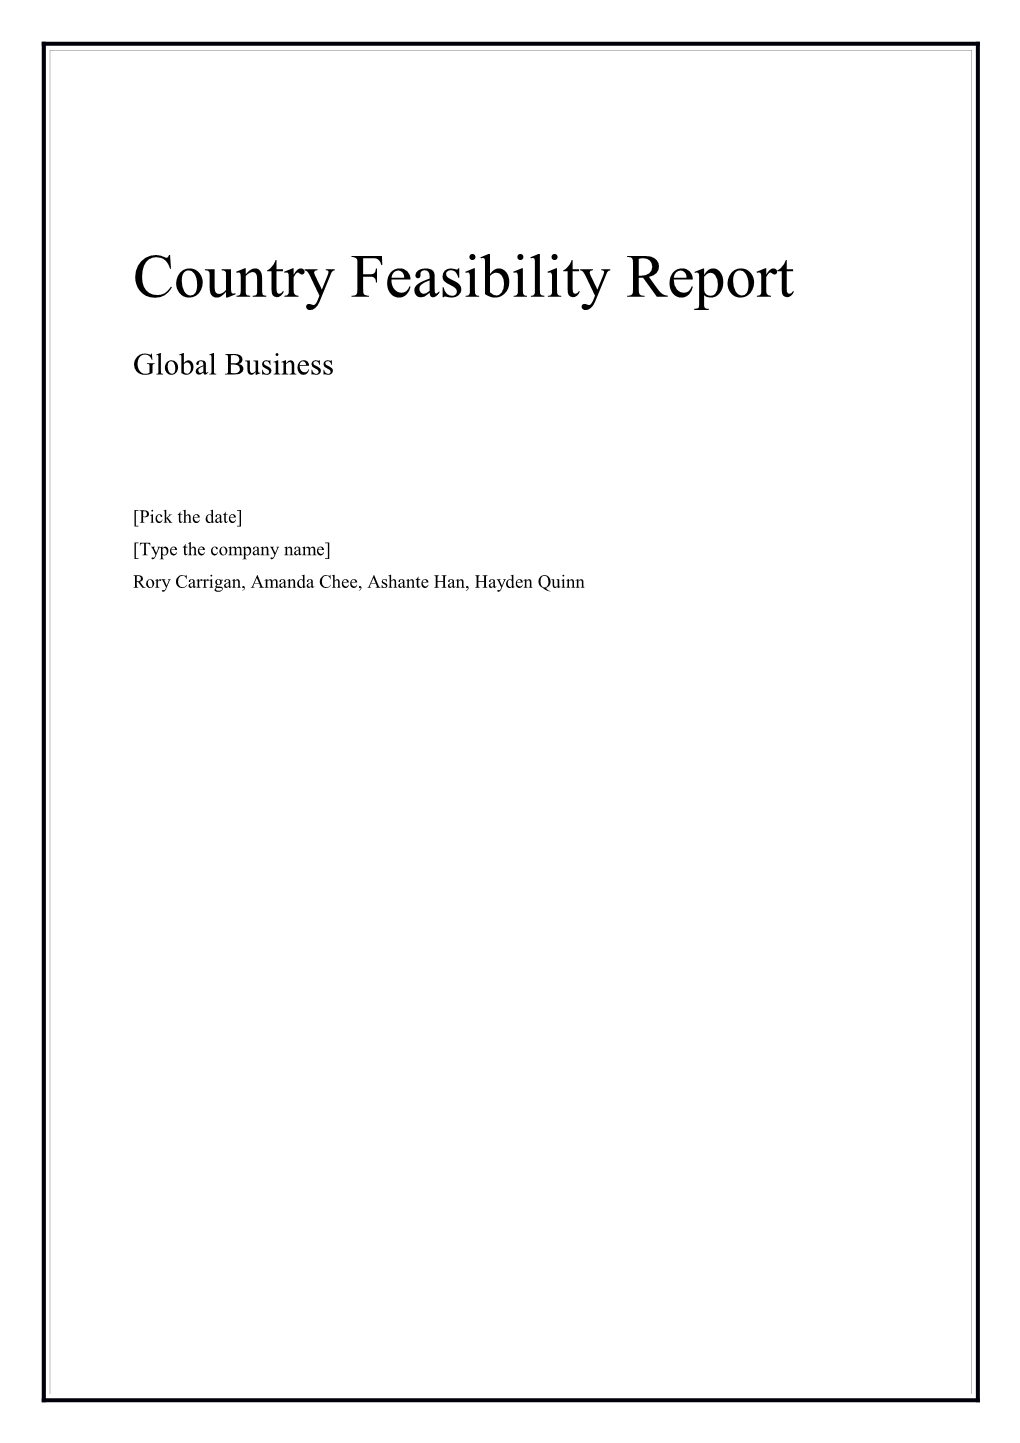 Country Feasibility Report